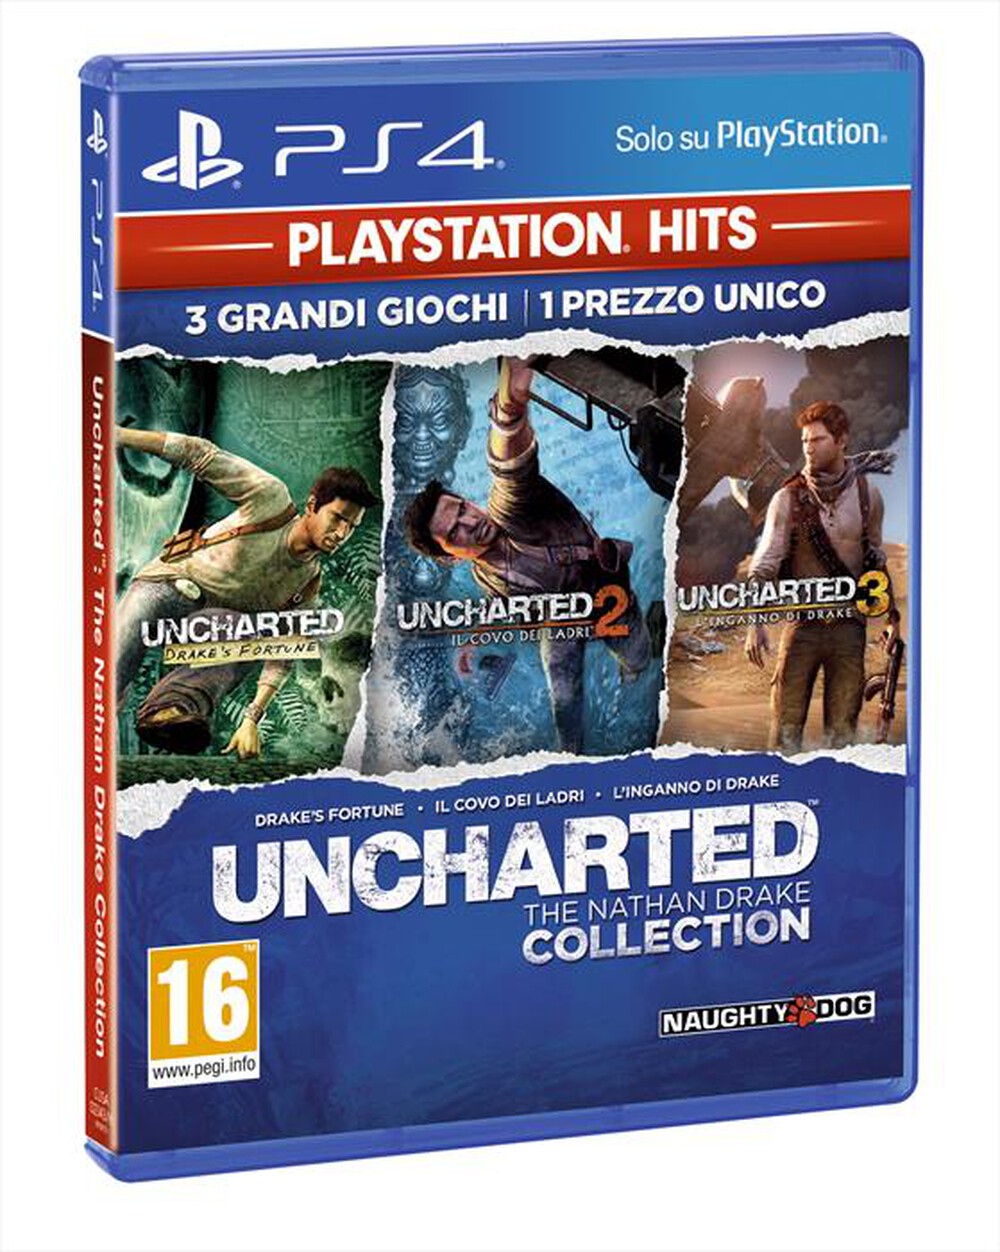 "SONY COMPUTER - UNCHARTED NATHAN DRAKE COLLECTION (PS4) PS HITS"